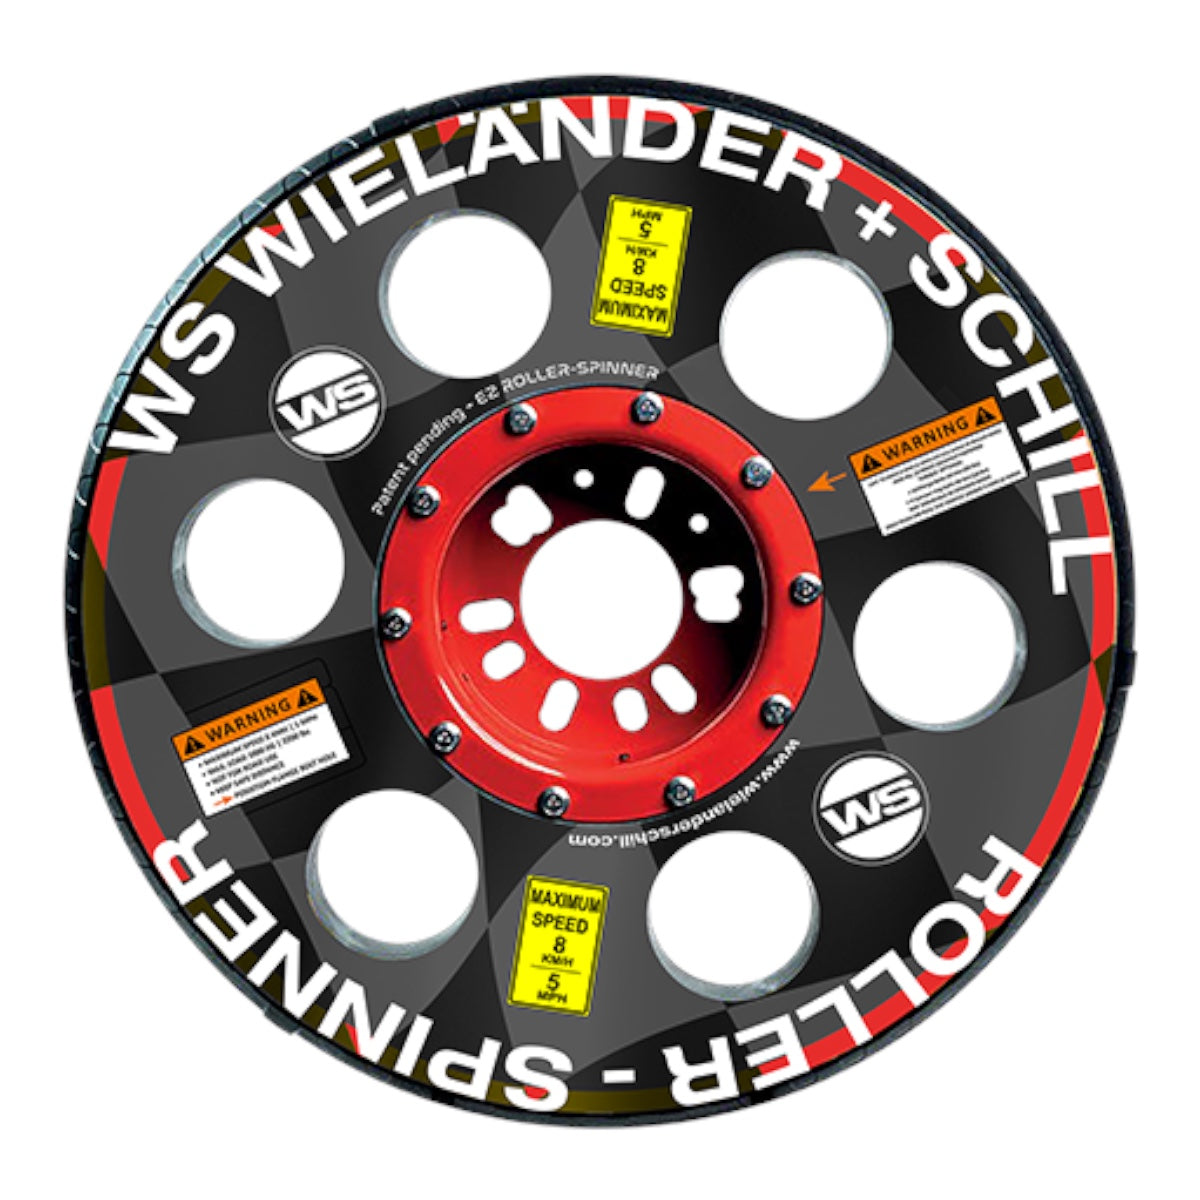 WS roller spinner | 4/5 painting wheel, spare wheel and maneuvering aid 